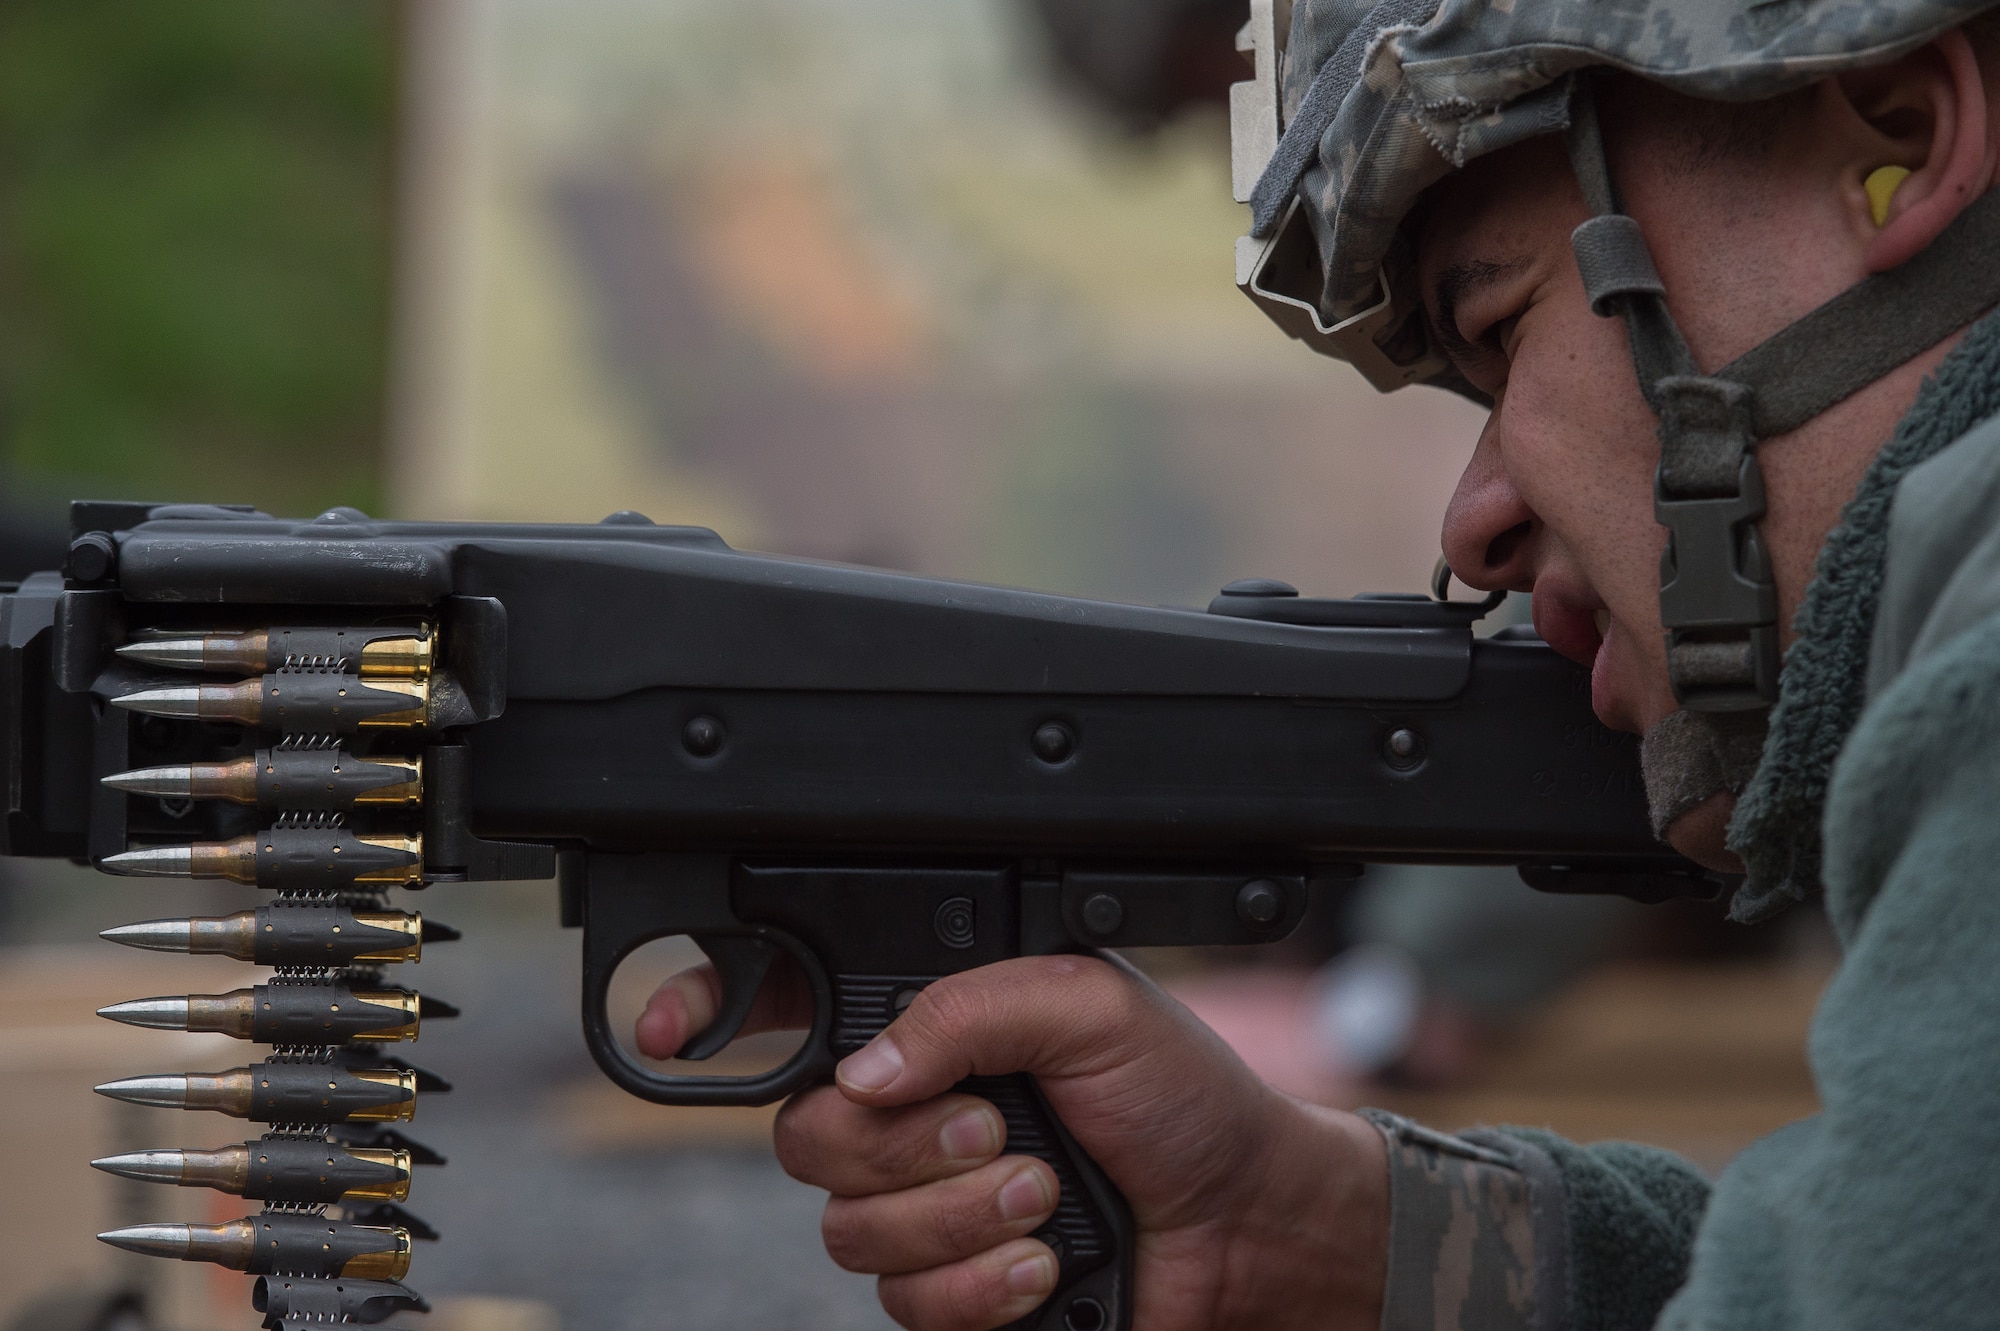 U.S. Air Force Senior Airman Anthony Bruner, 86th Security Forces Squadron member, aims an MG3 machine gun Nov. 18, 2015, at Zweibruecken, Germany. More than 20 members of the 86th SFS attempted to earn the Bundeswehr (German army) marksmanship badge by hitting targets with a variety of German weapons. (U.S. Air Force photo/Senior Airman Damon Kasberg)